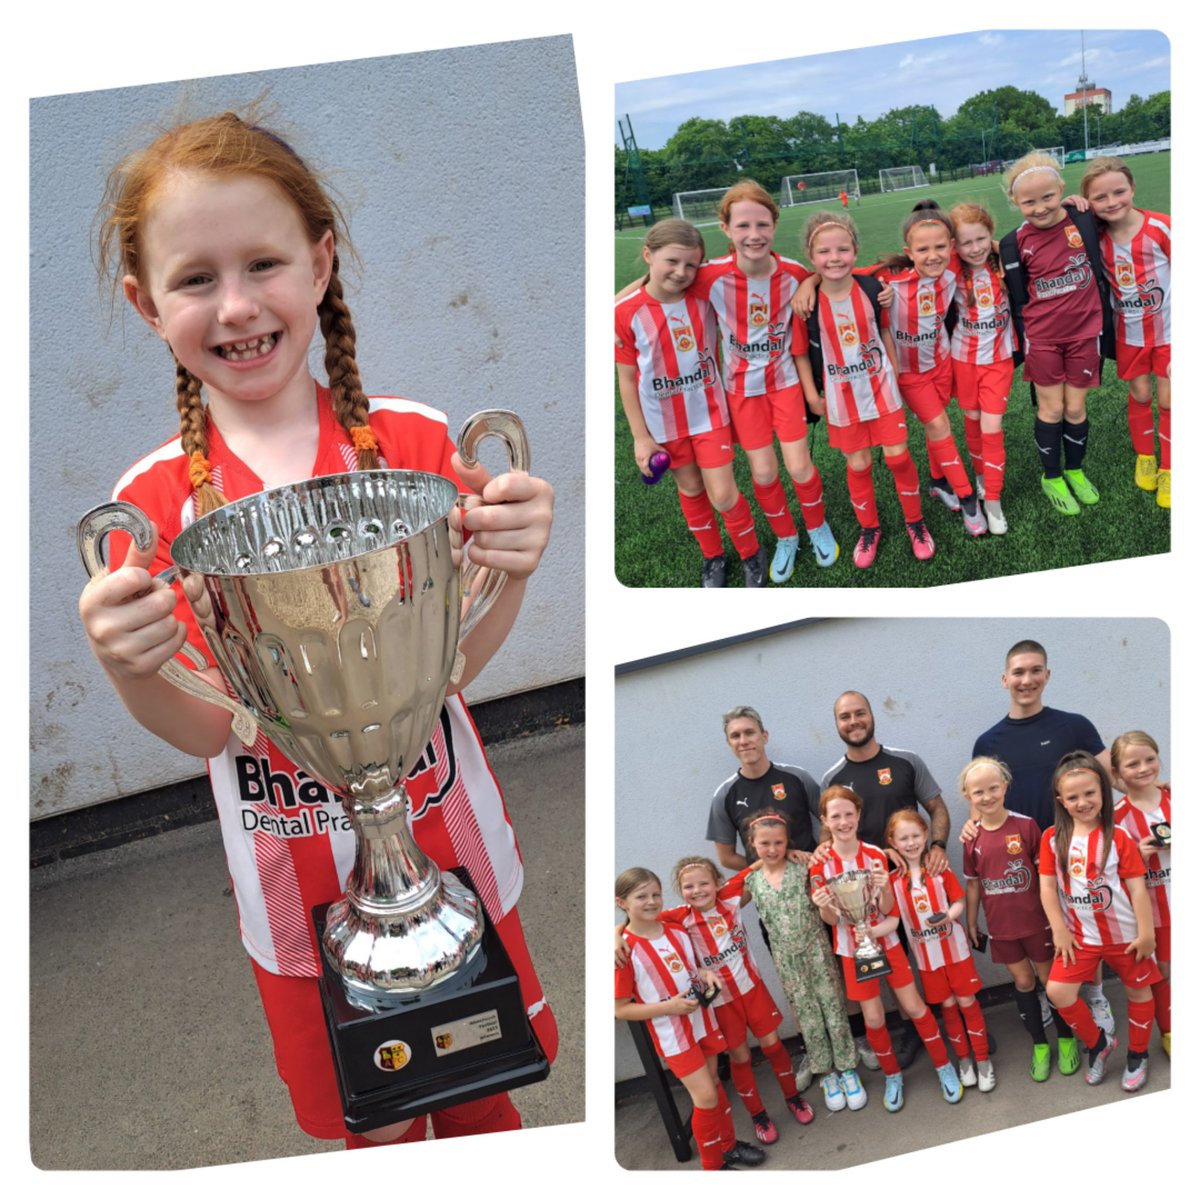 So proud of our absolute world today! Her and her team mates only went and won their first cup! 
Keep smashing it girl, we are so proud of the baller you are becoming! 
#StourFamily
#HerGameToo
#GlassGirls
#AlvechurchFestival 
#GirlsFootball
#WhoRunTheWorldGirls 
@robwinnall